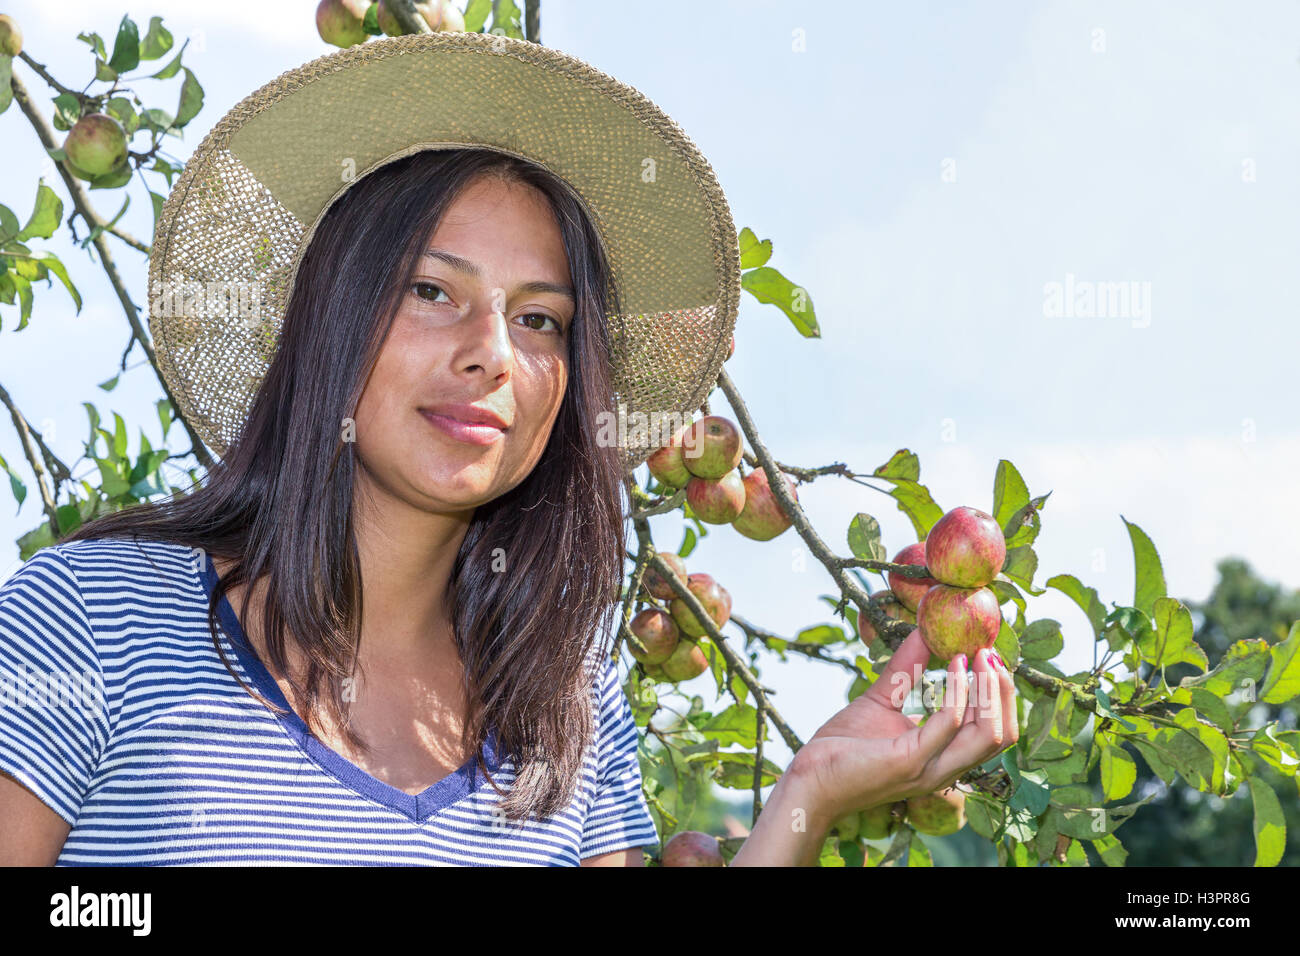 Young european woman wearing straw hat holding apples in orchard Stock Photo